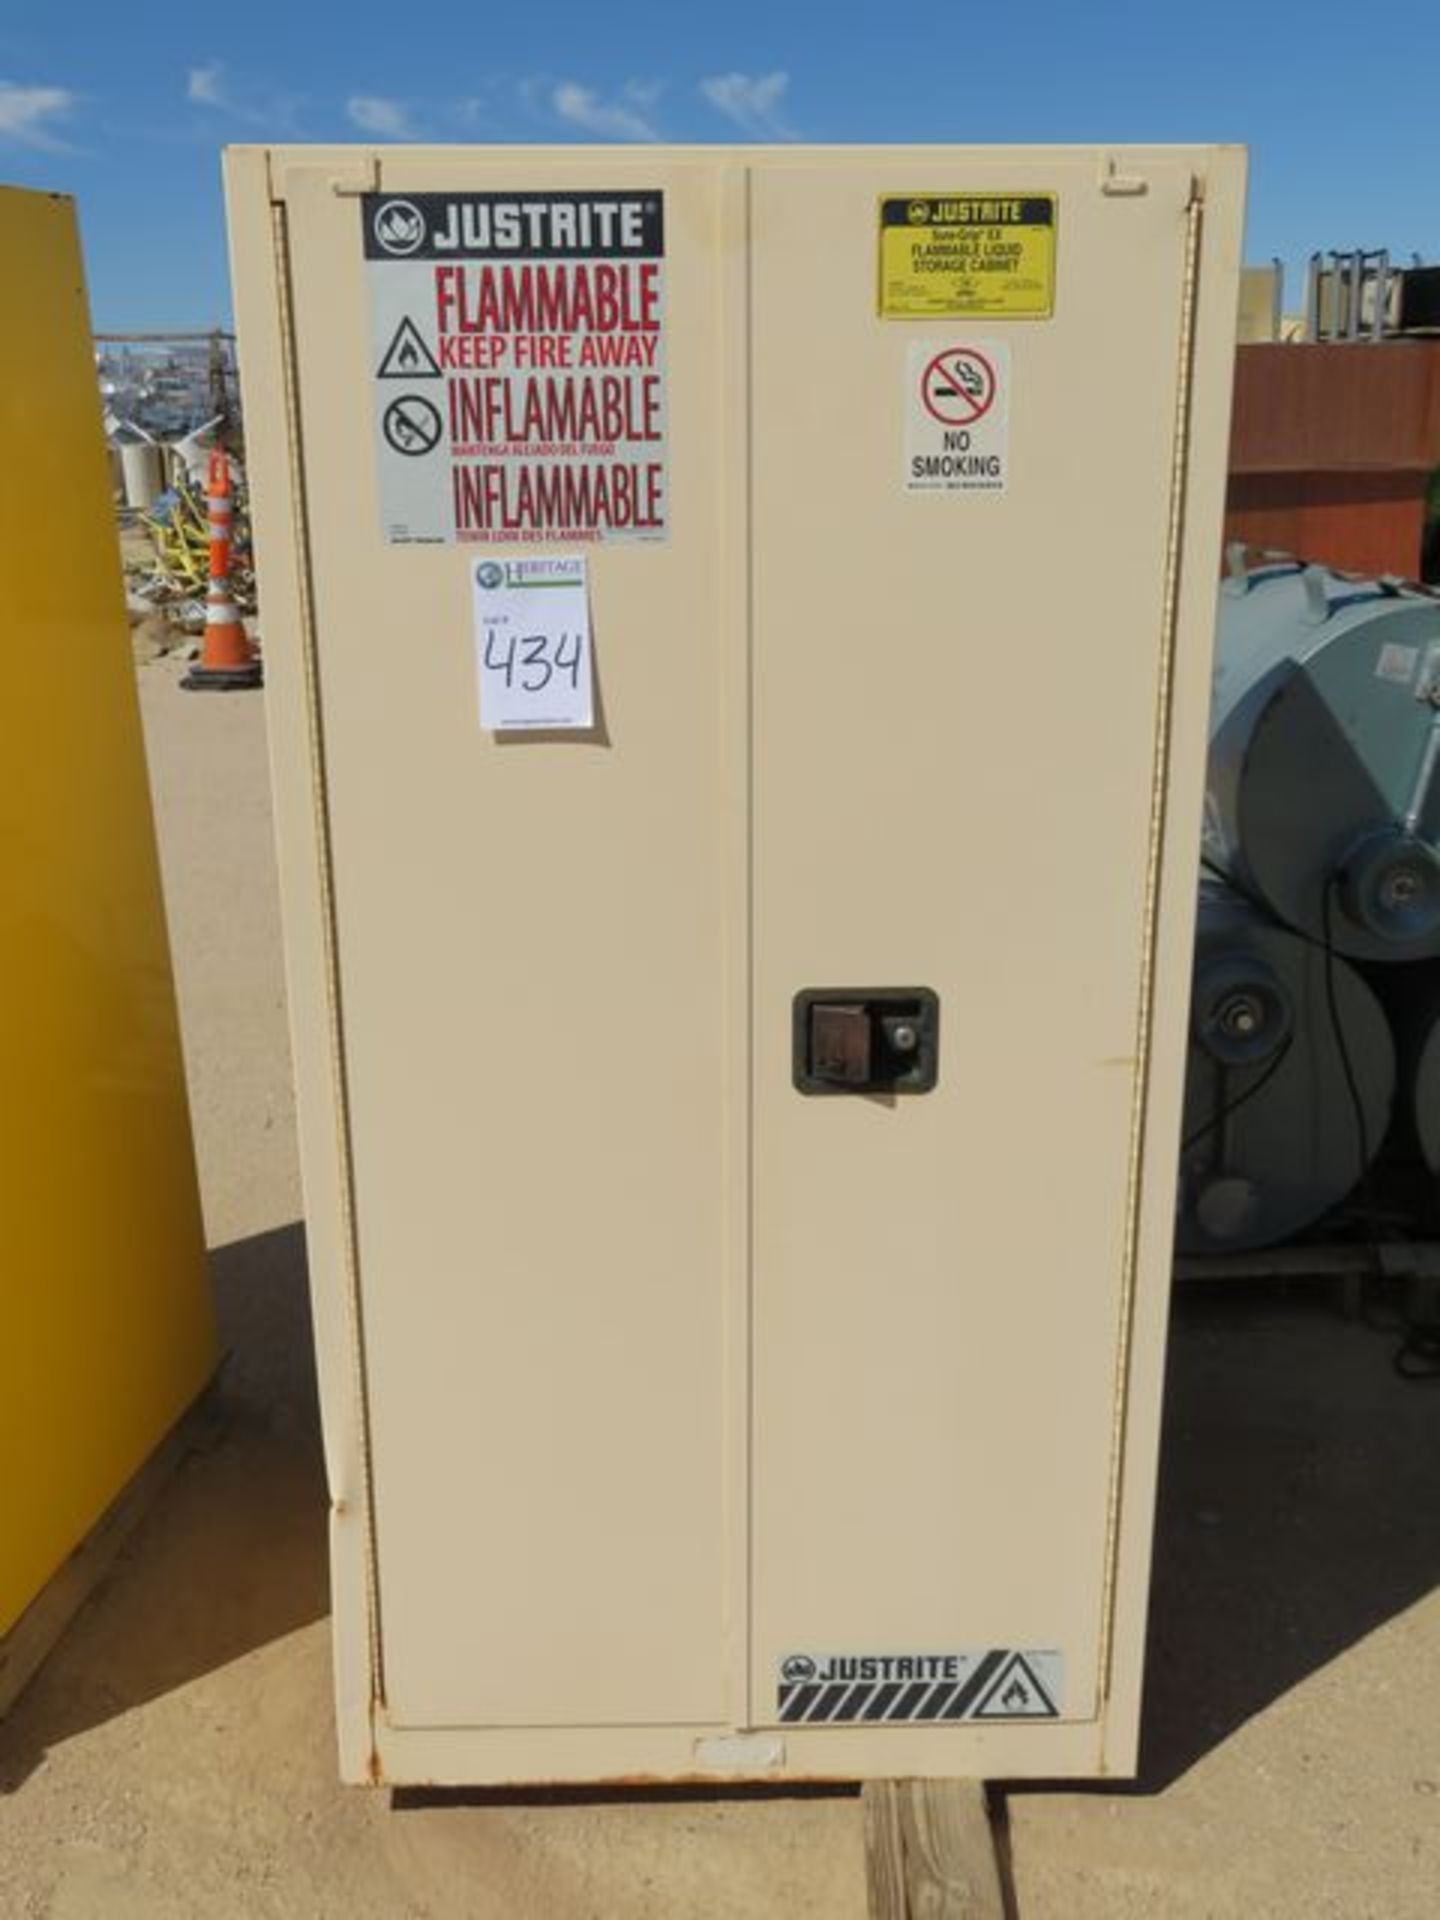 Justrite 896020 Flammable Liquid Storage Cabinet. 60 Gallon Capacity. Asset Located at 42134